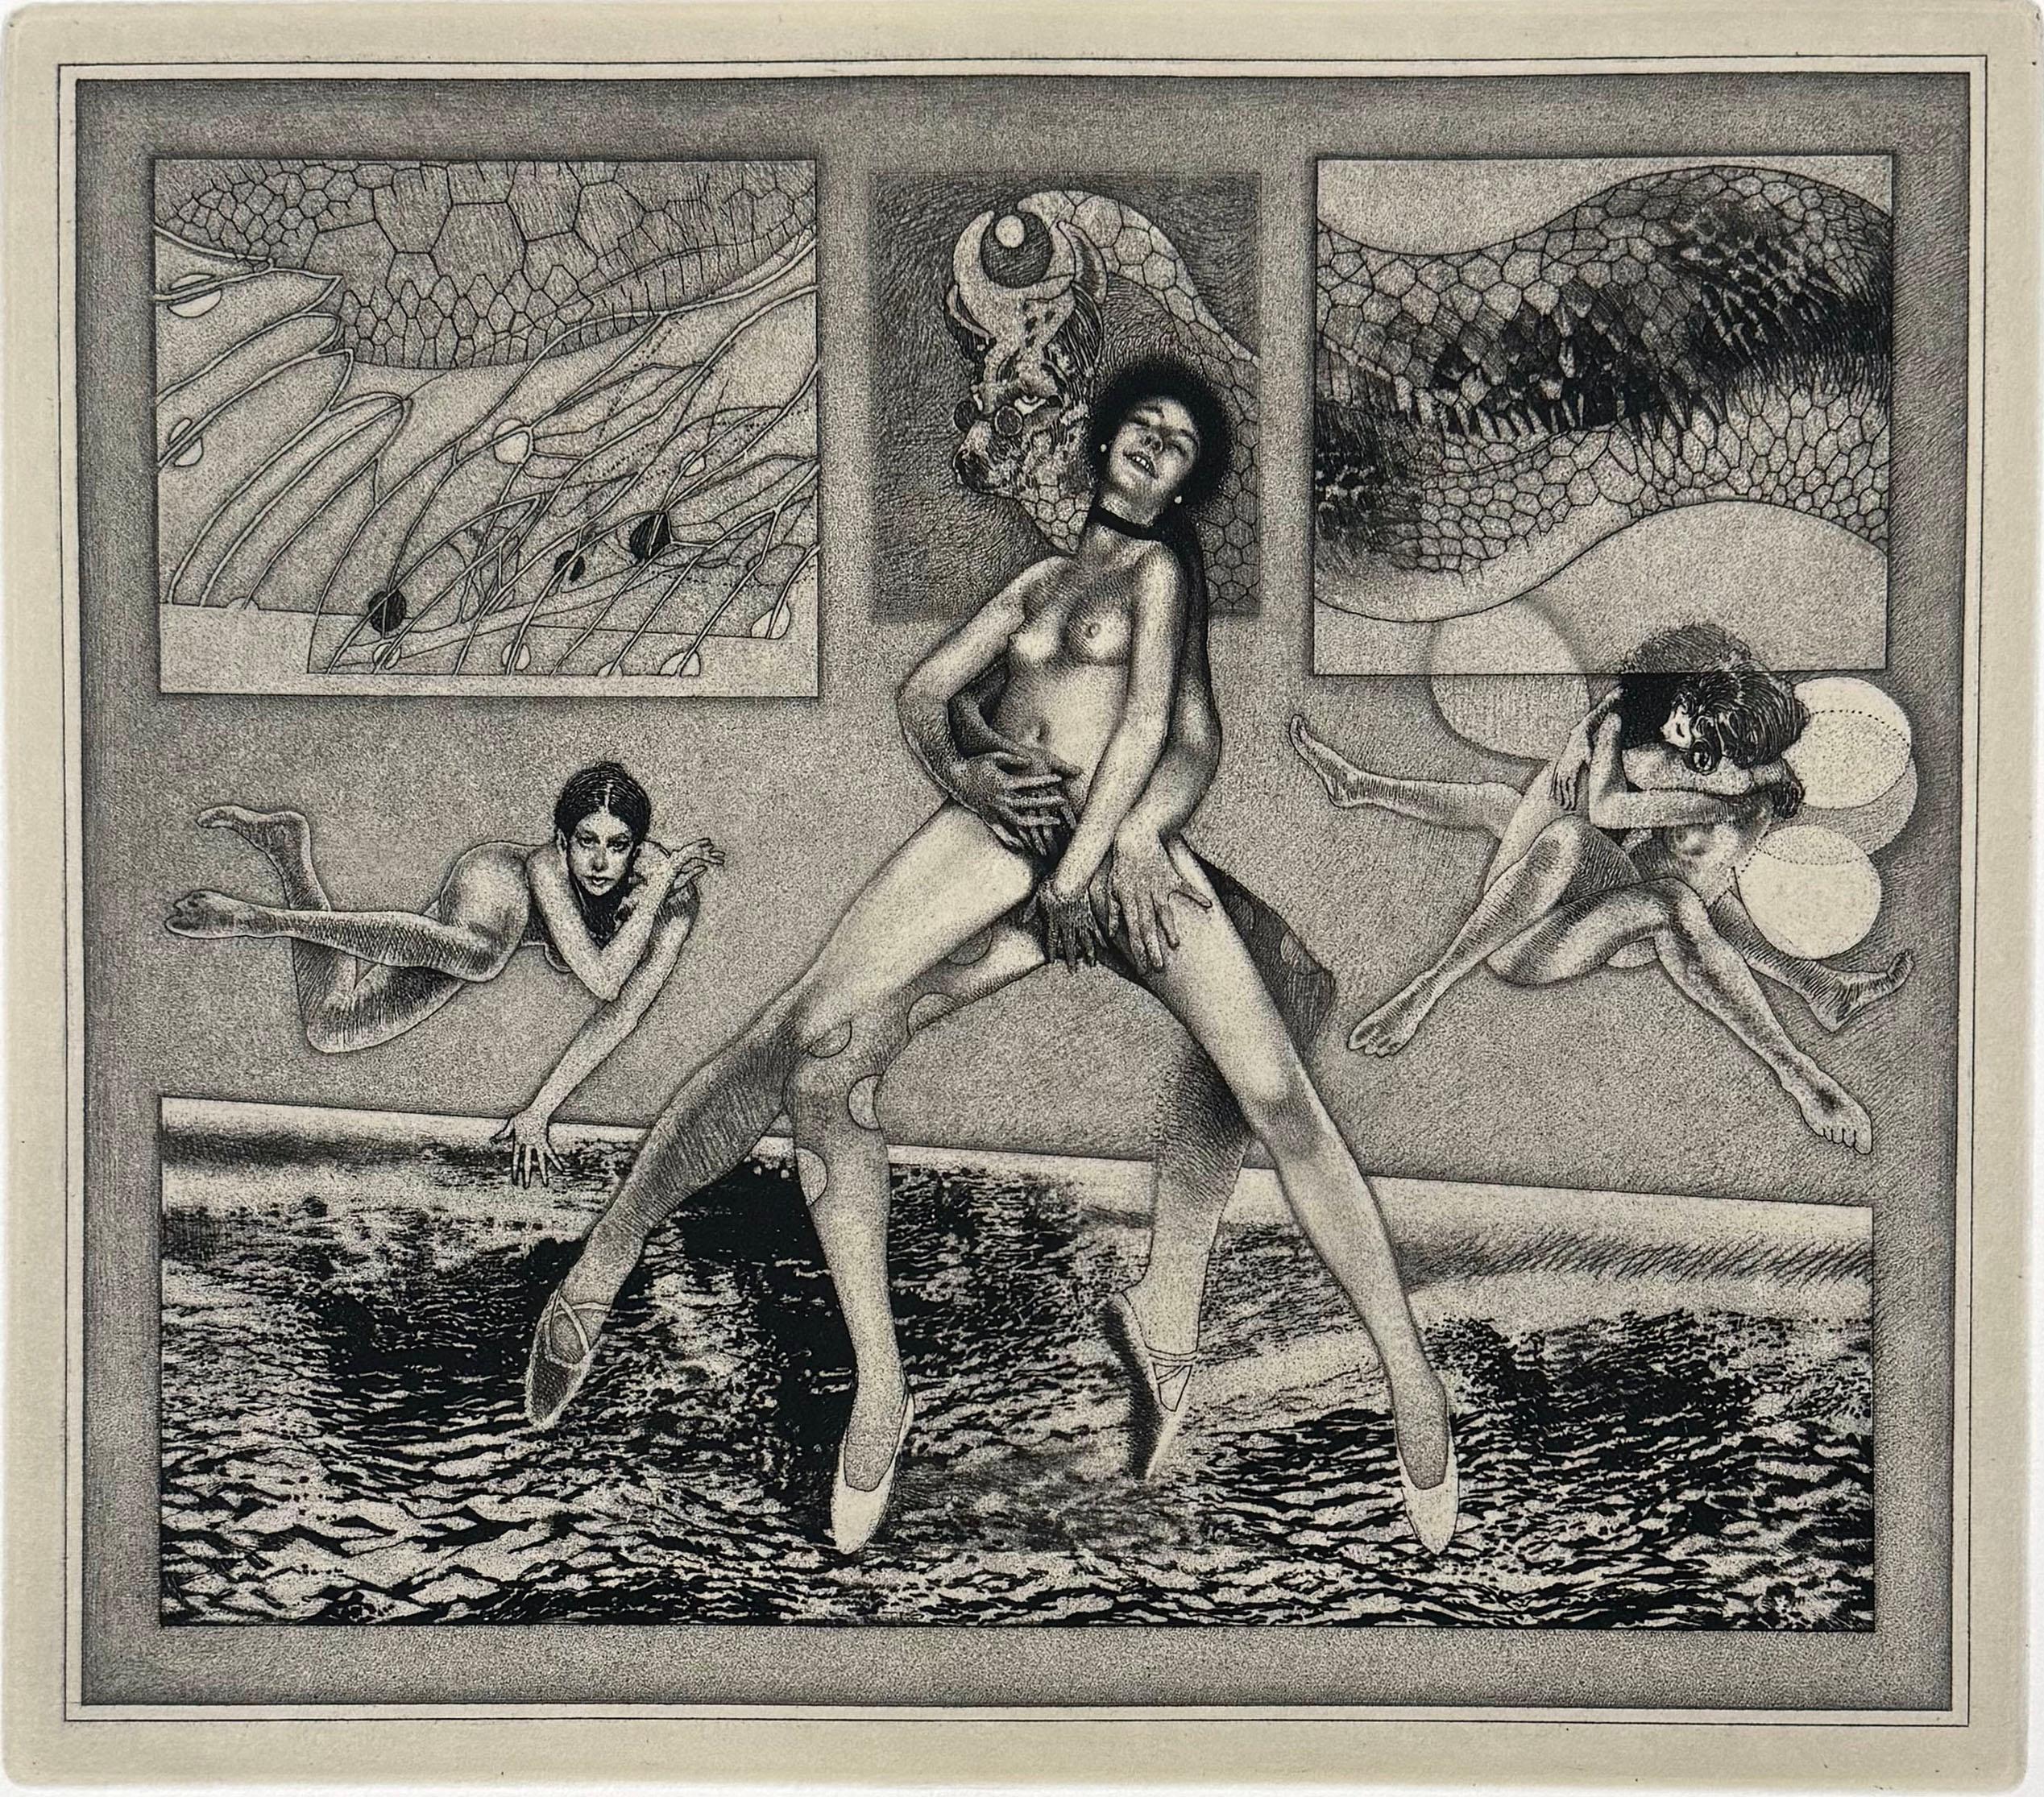 Resist Ground Etching and Engraving from a Copper Plate on BFK Rives, Somerset Buff, Wove Paper
Medium: Resist Ground Etching & Engraving    
Edition of 125        
Year: 1982

One of a group of more sensual or erotic images completed by Milton in